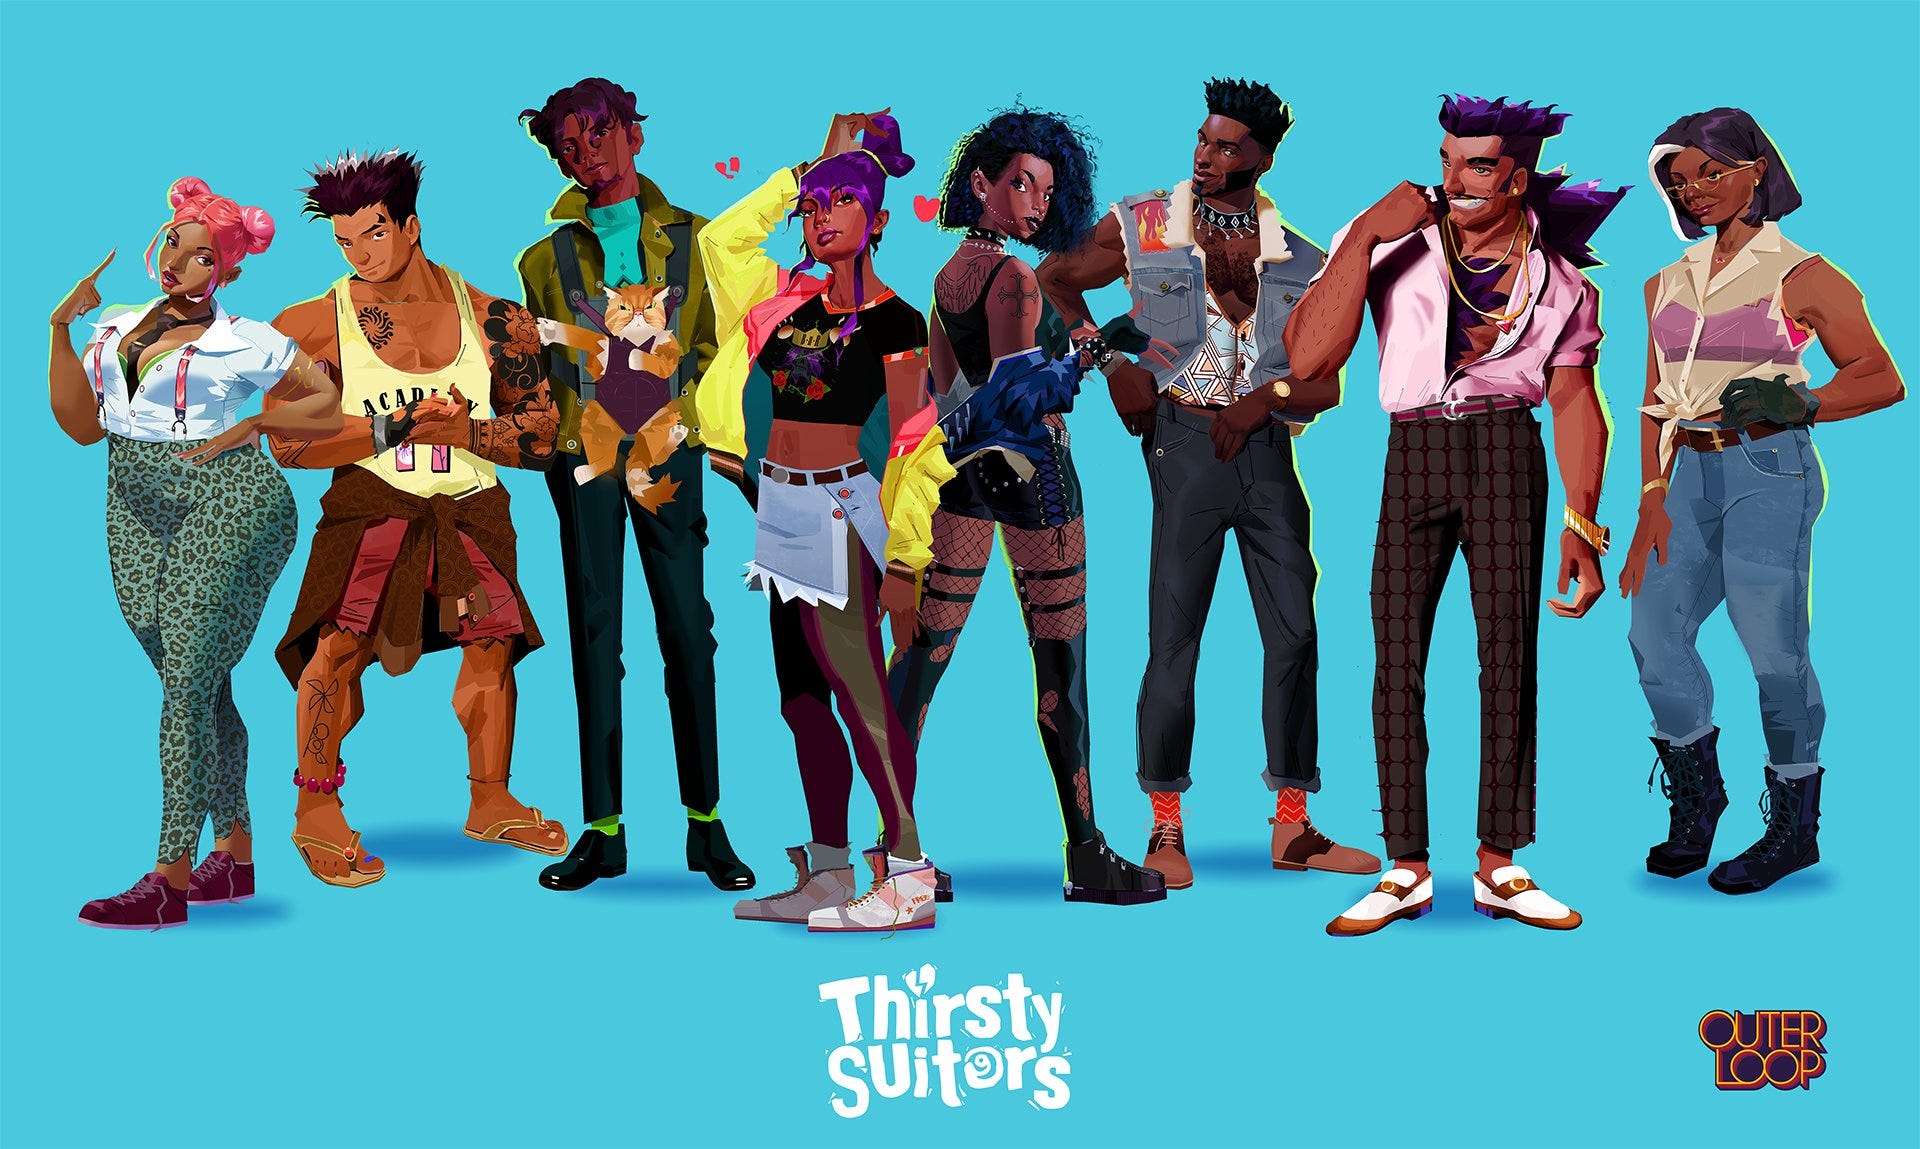 Thirsty Suitors is about grinding rails, home cooking and duelling your ...